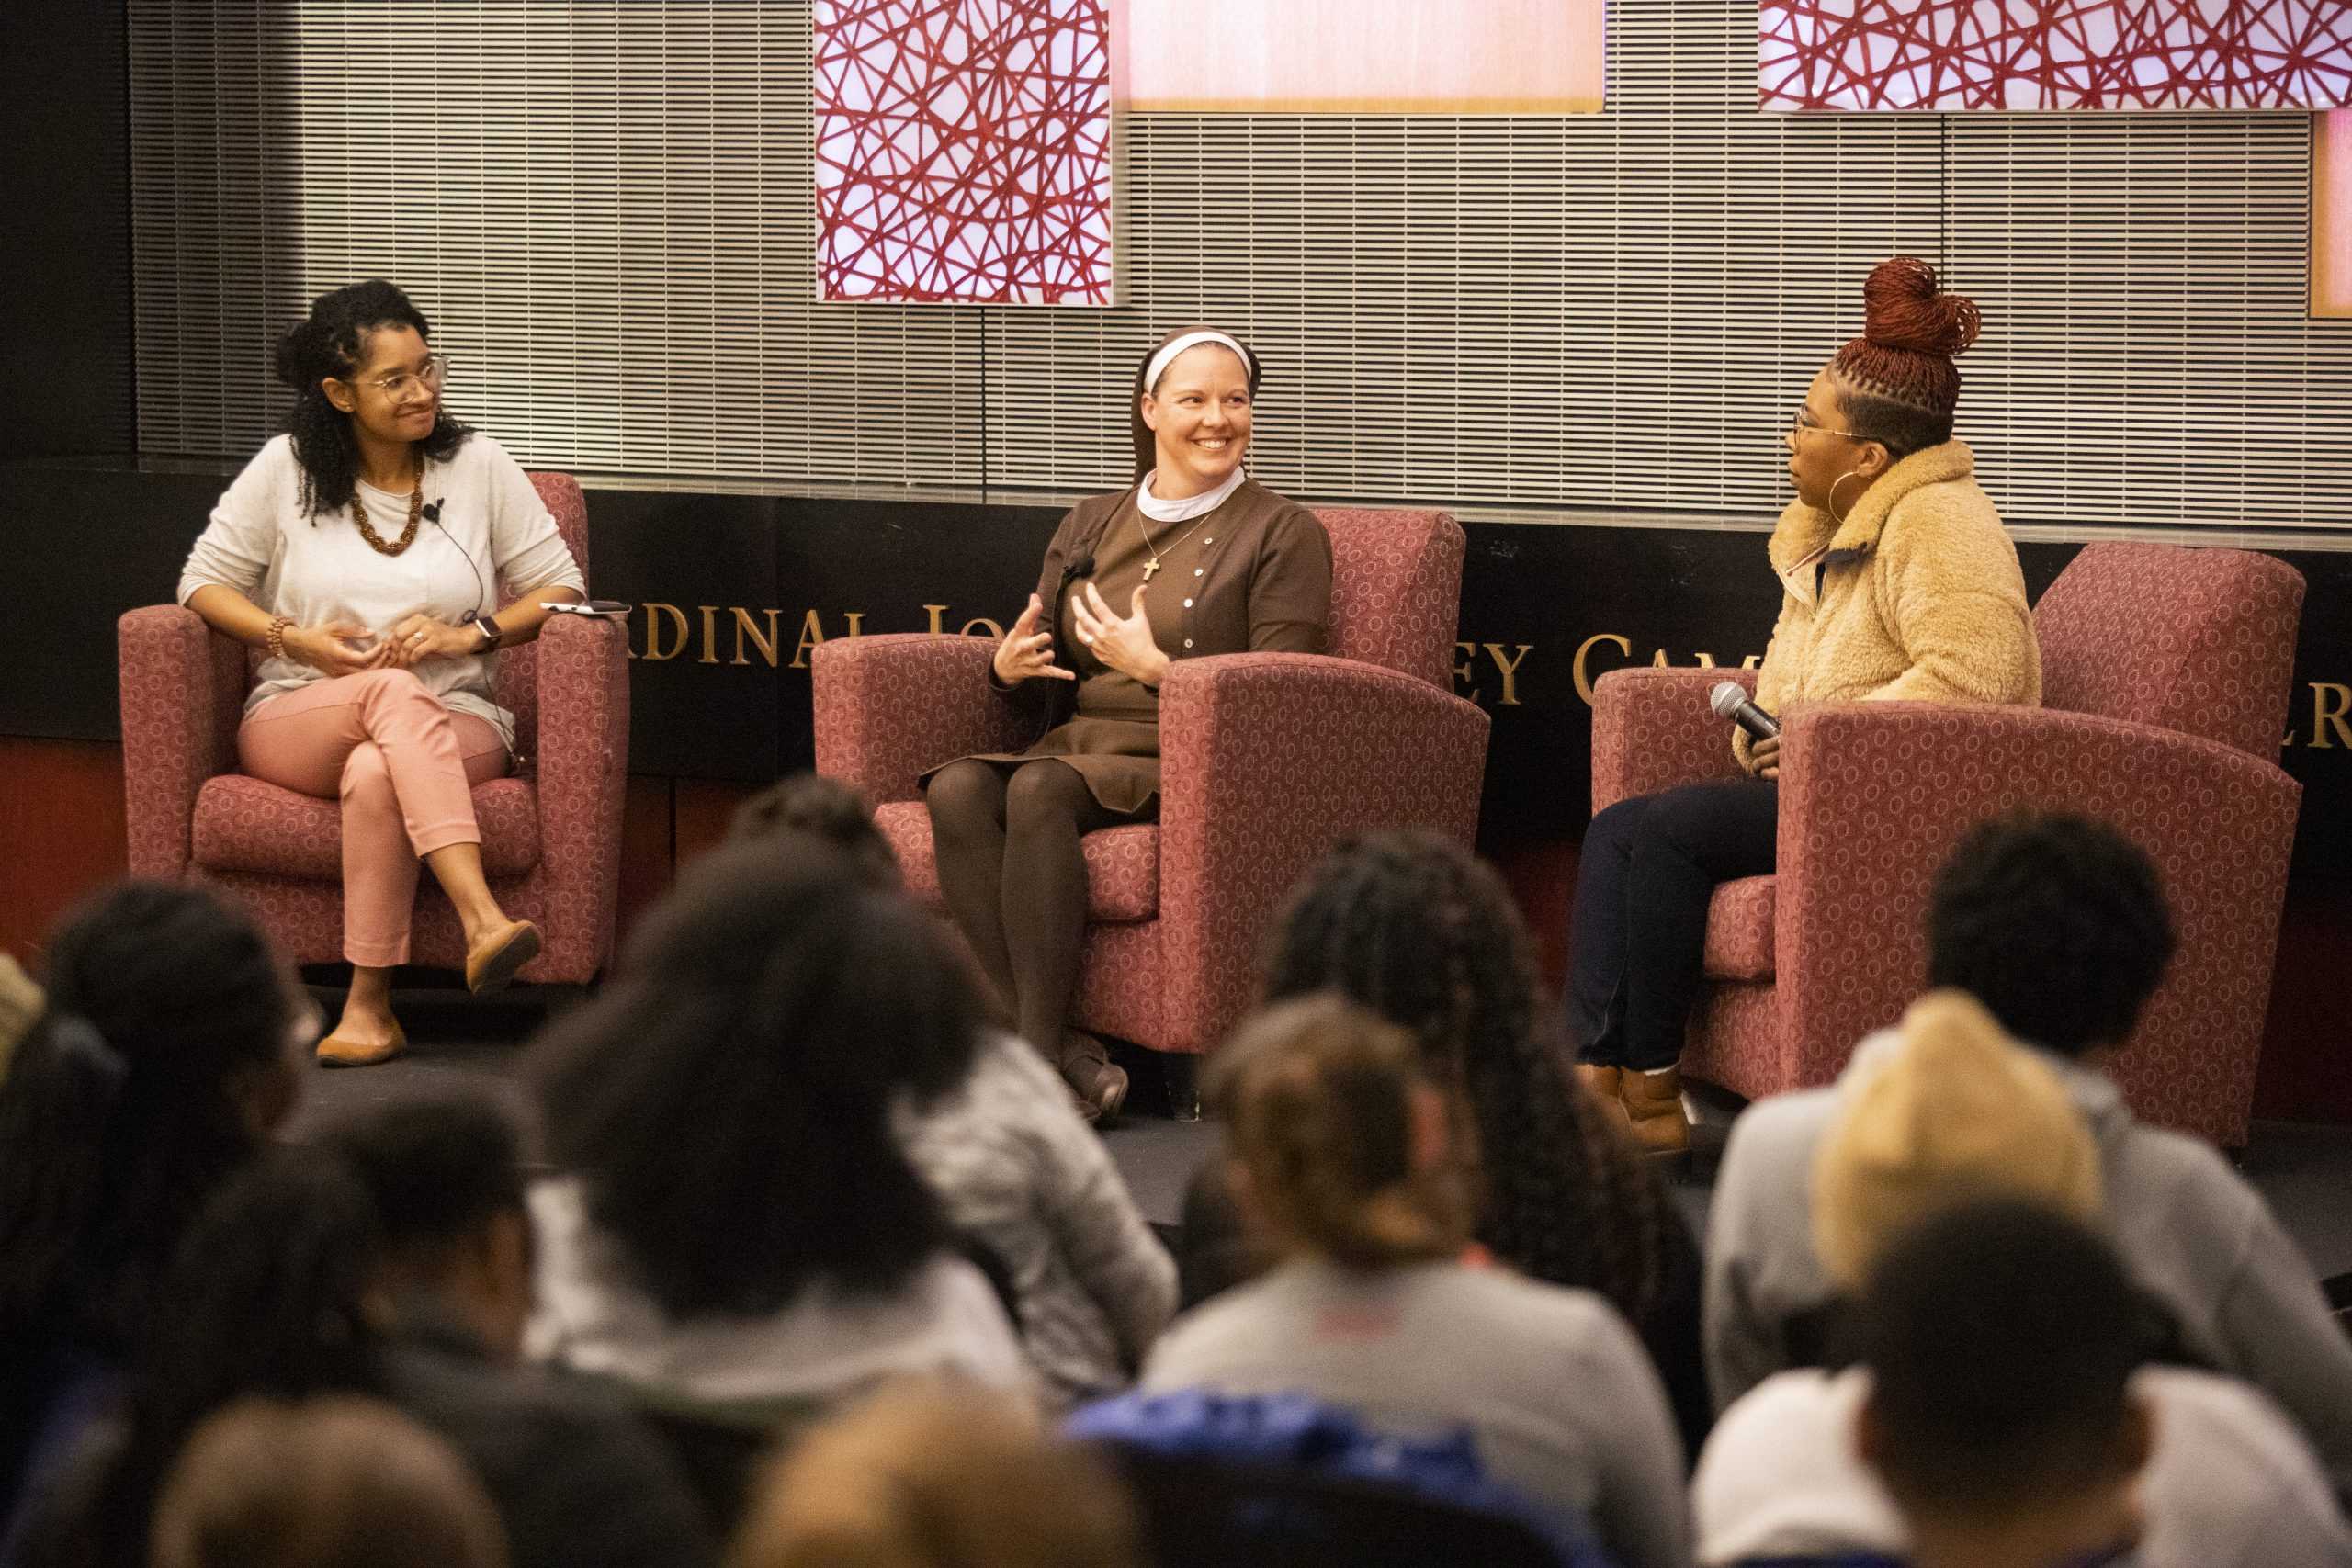 From left to right: Dawn Araujo-Hawkins, Sister Alison McCrary and Lezley McSpadden speak in the Cardinal Foley Campus Center on Feb 5. PHOTO: MITCHELL SHIELDS ’22/THE HAWK